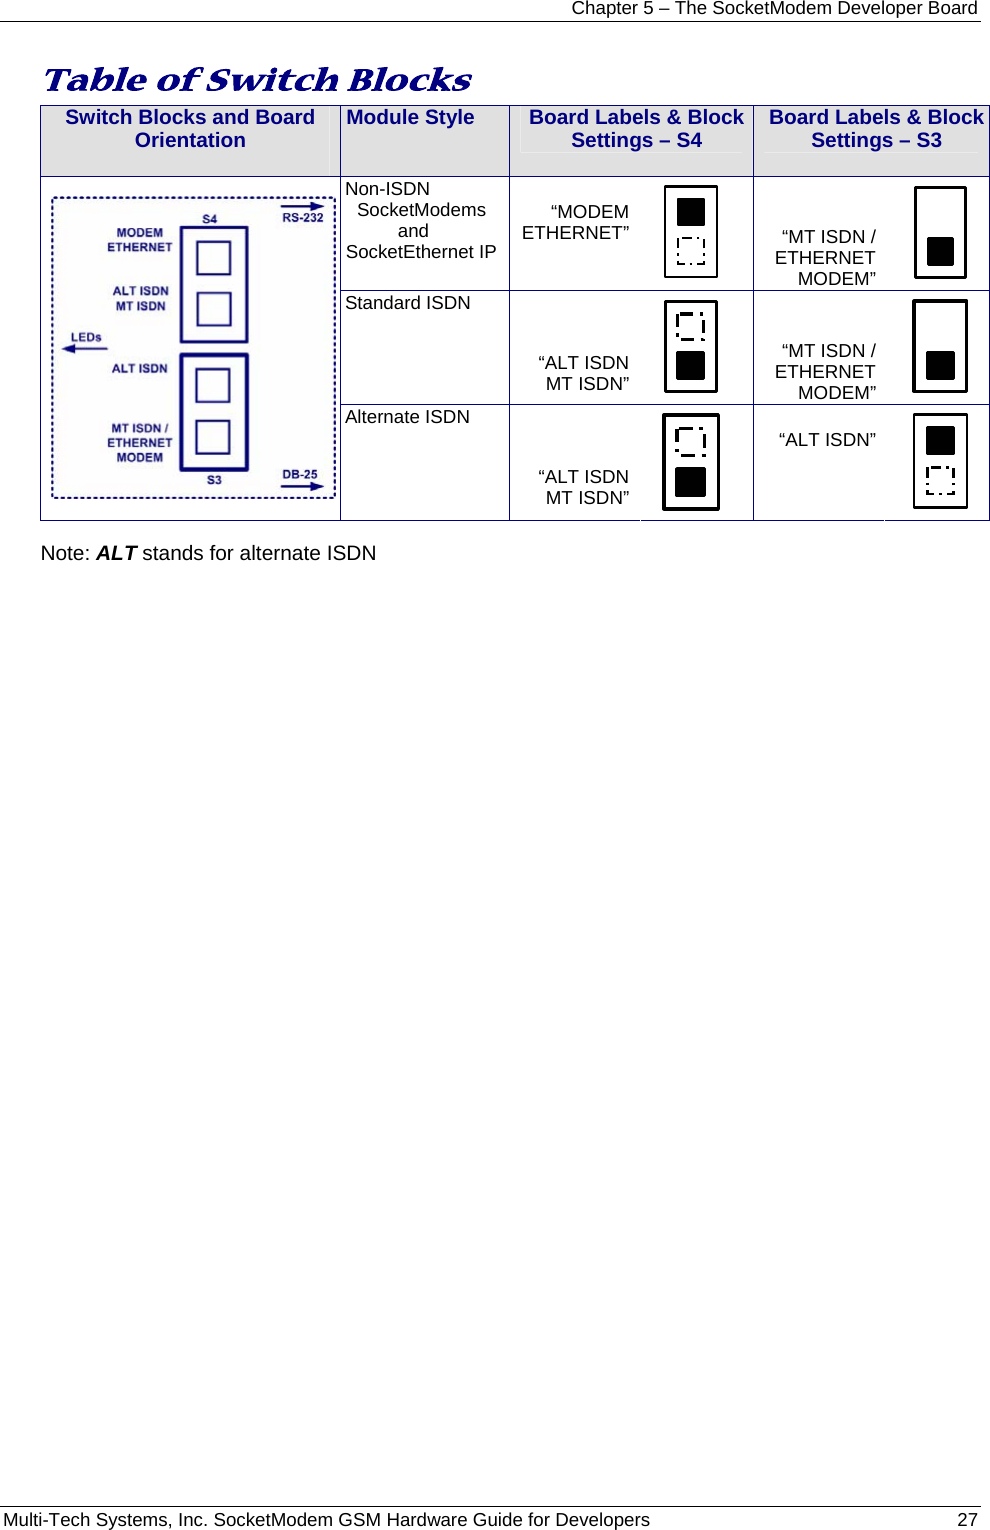 Chapter 5 – The SocketModem Developer Board Multi-Tech Systems, Inc. SocketModem GSM Hardware Guide for Developers   27  Table of Switch Blocks      Switch Blocks and Board Orientation    Module Style   Board Labels &amp; Block Settings – S4  Board Labels &amp; Block Settings – S3 Non-ISDN  SocketModems            and  SocketEthernet IP “MODEM ETHERNET”   “MT ISDN /  ETHERNET MODEM”   Standard ISDN “ALT ISDN  MT ISDN”   “MT ISDN /  ETHERNET MODEM”    Alternate ISDN  “ALT ISDN  MT ISDN”    “ALT ISDN”   Note: ALT stands for alternate ISDN     